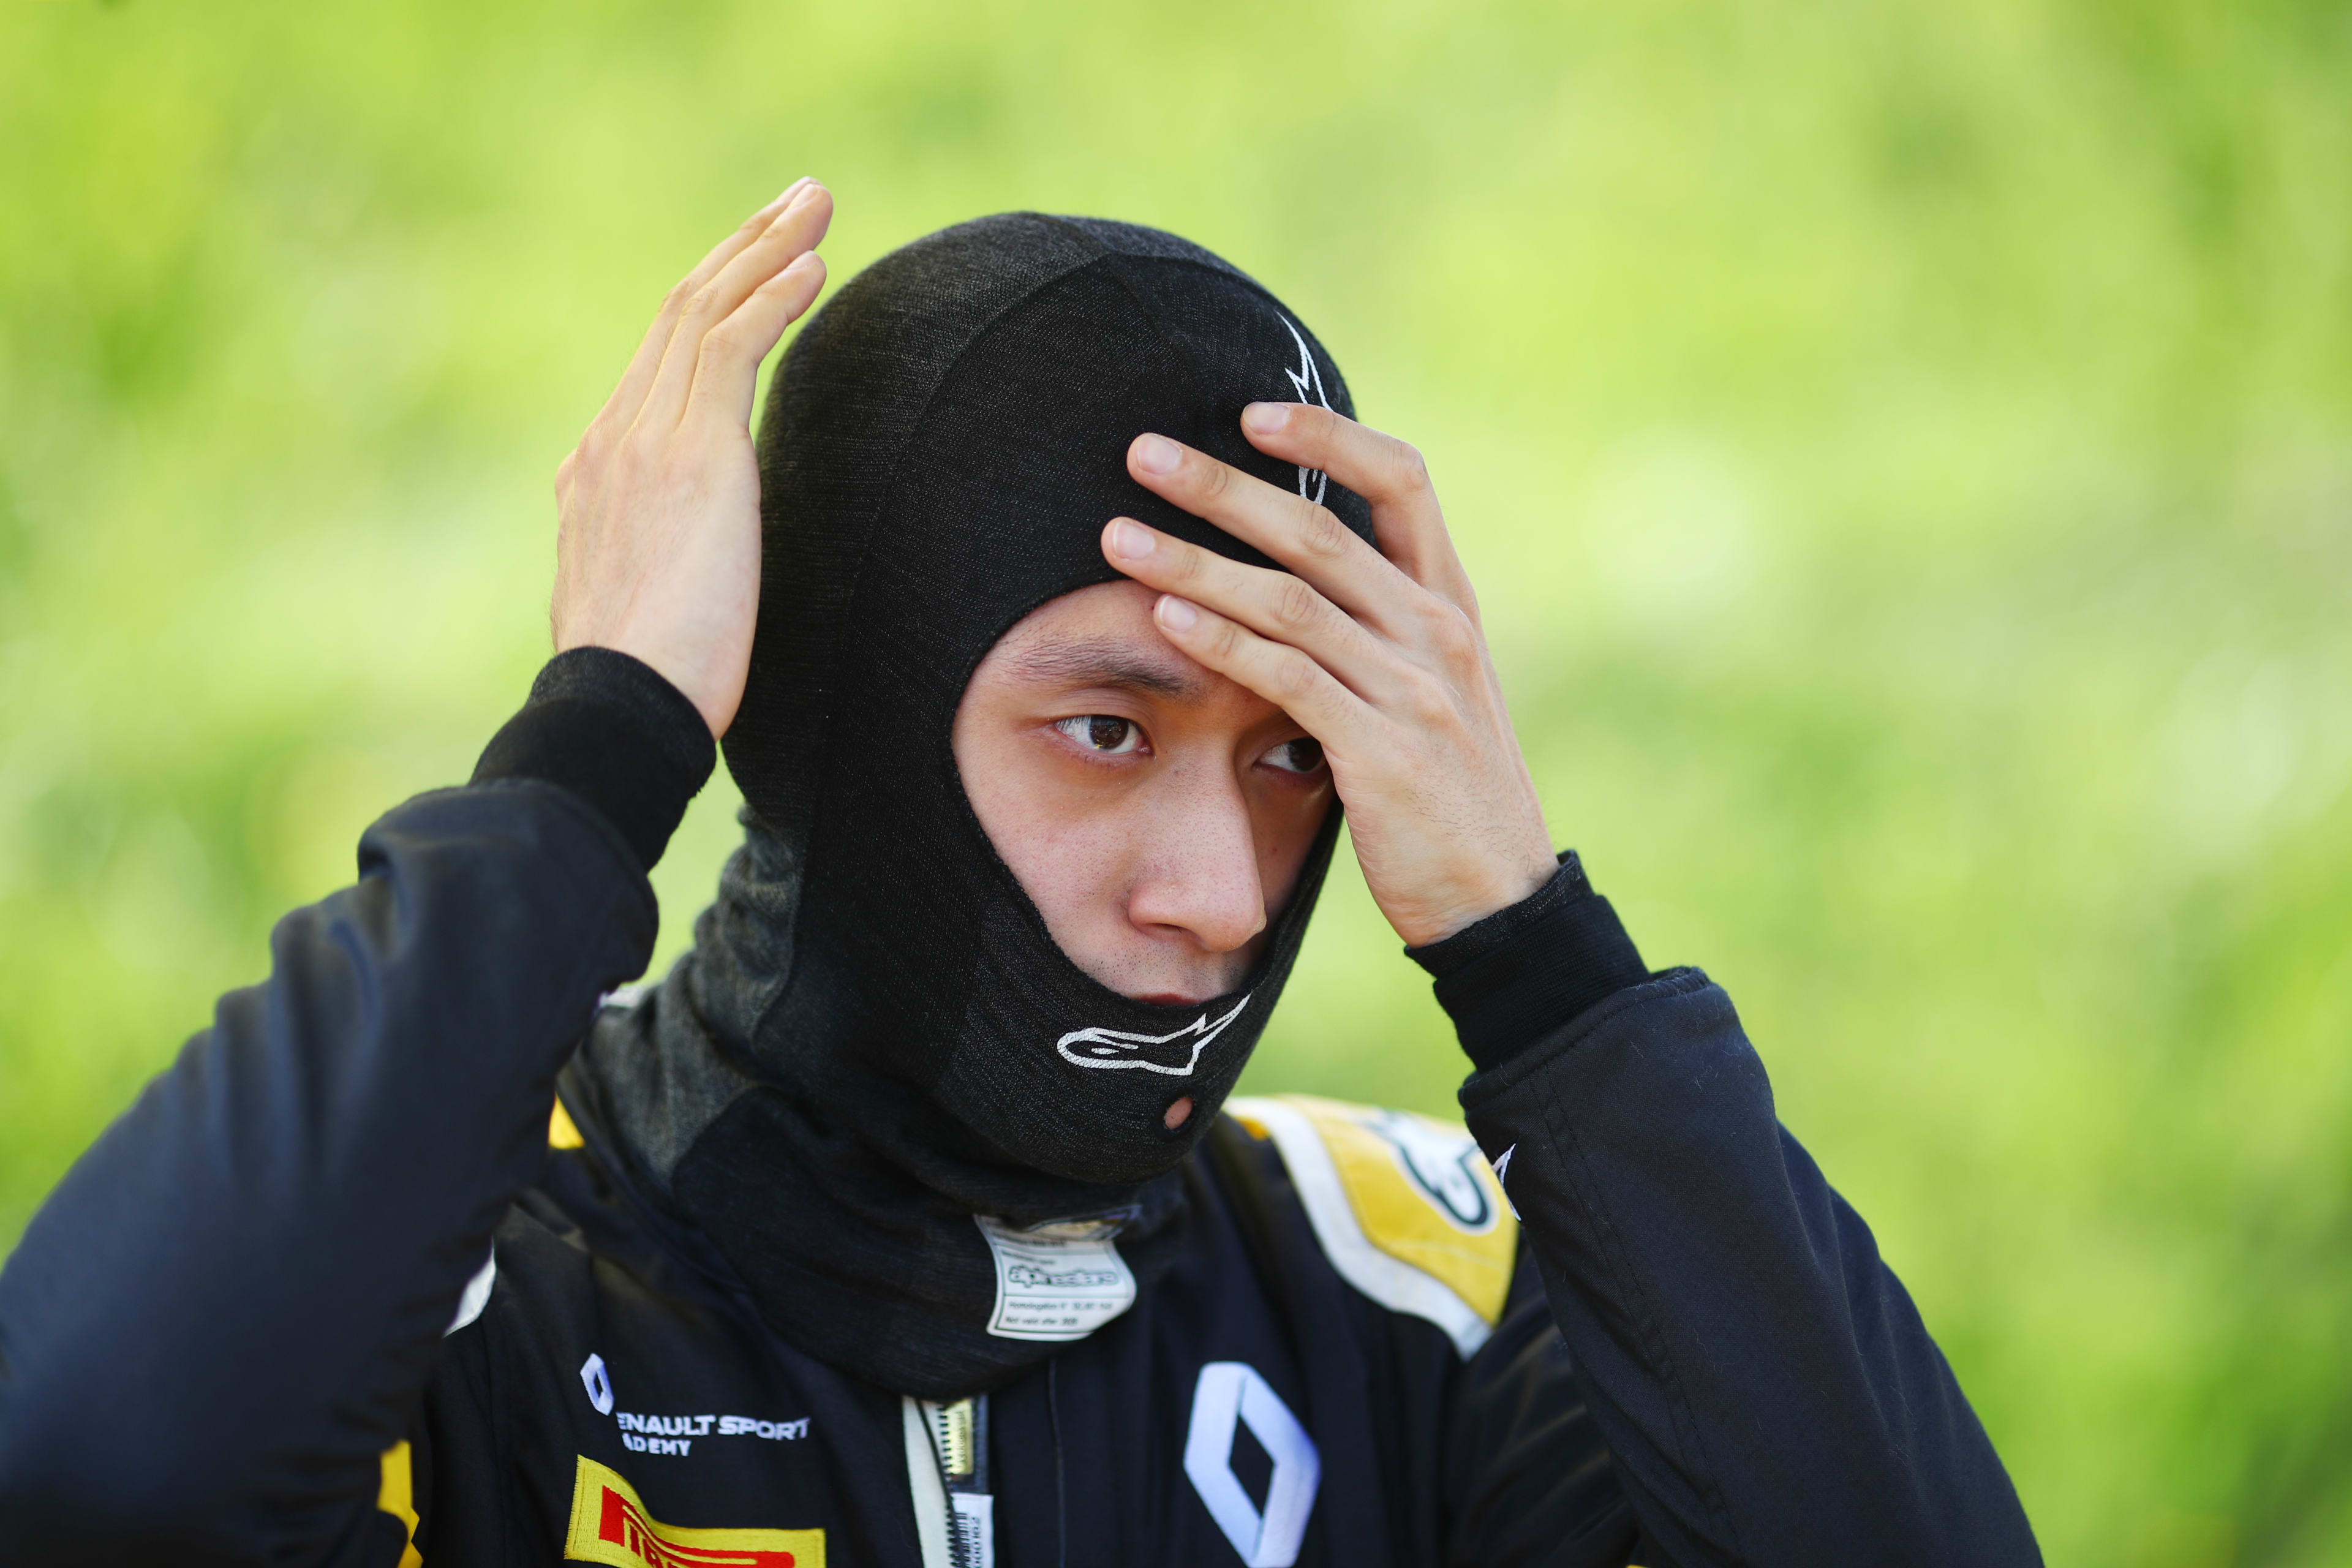 Up-and-coming F2 racer Guanyu Zhou completes two-day F1 test with